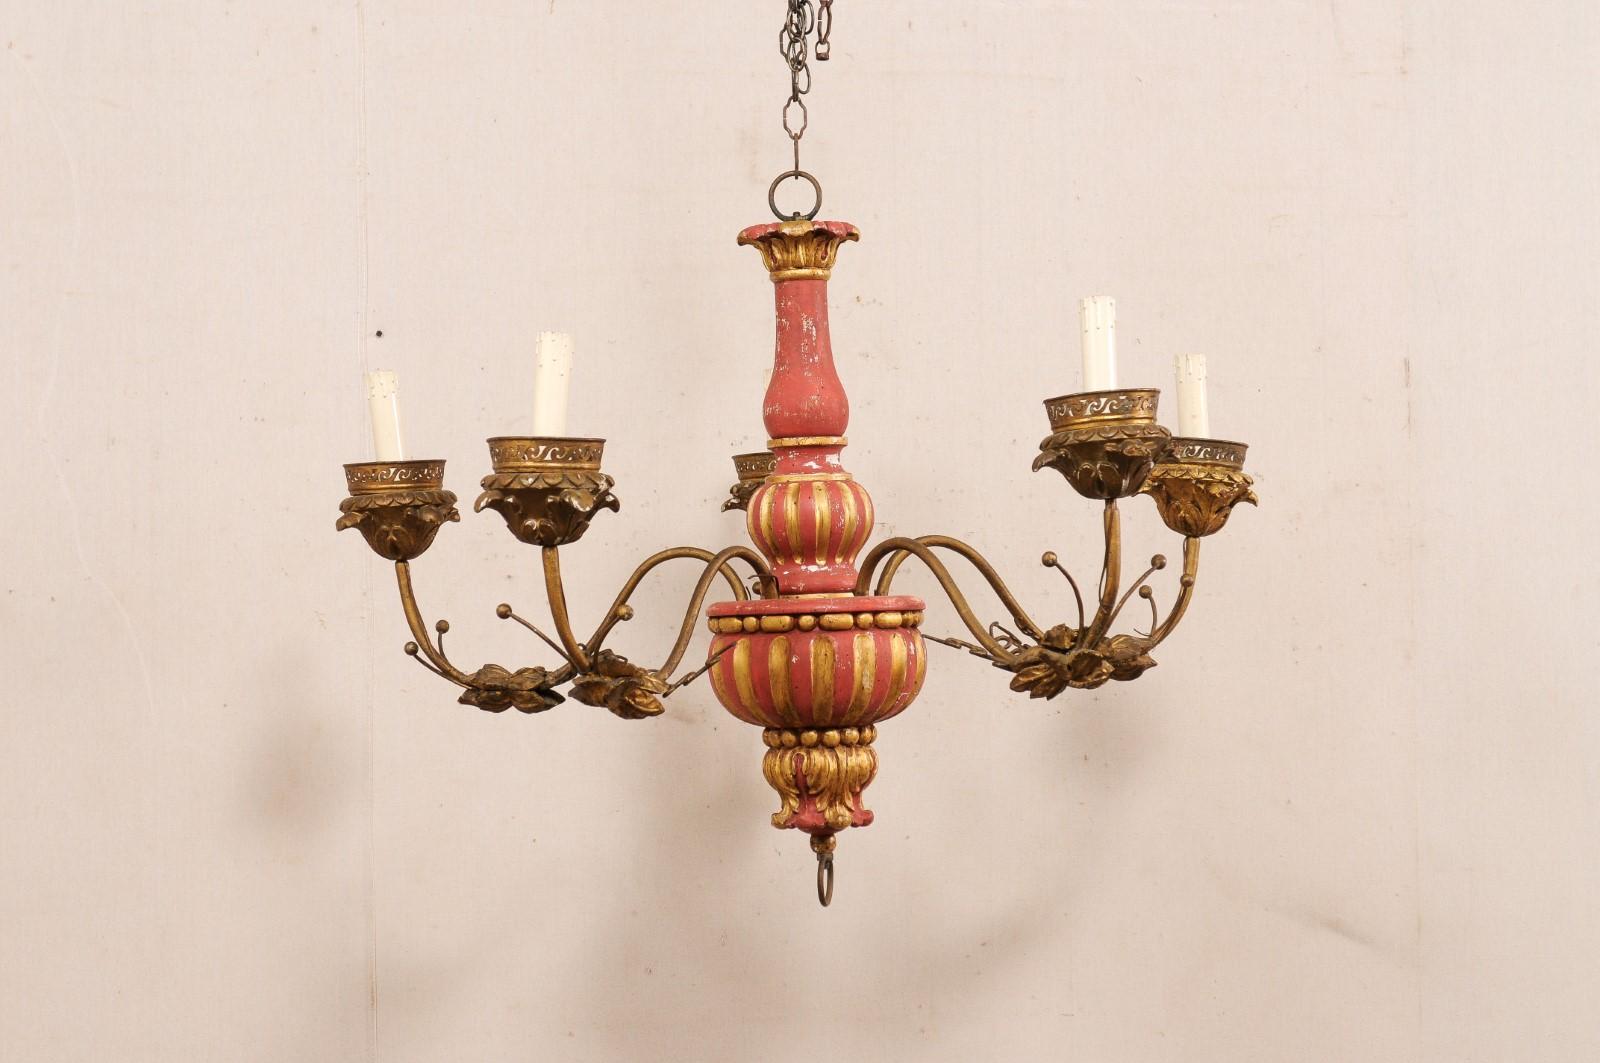 Italian Antique Chandelier w/Carved Center Column, Red & Gold For Sale 1